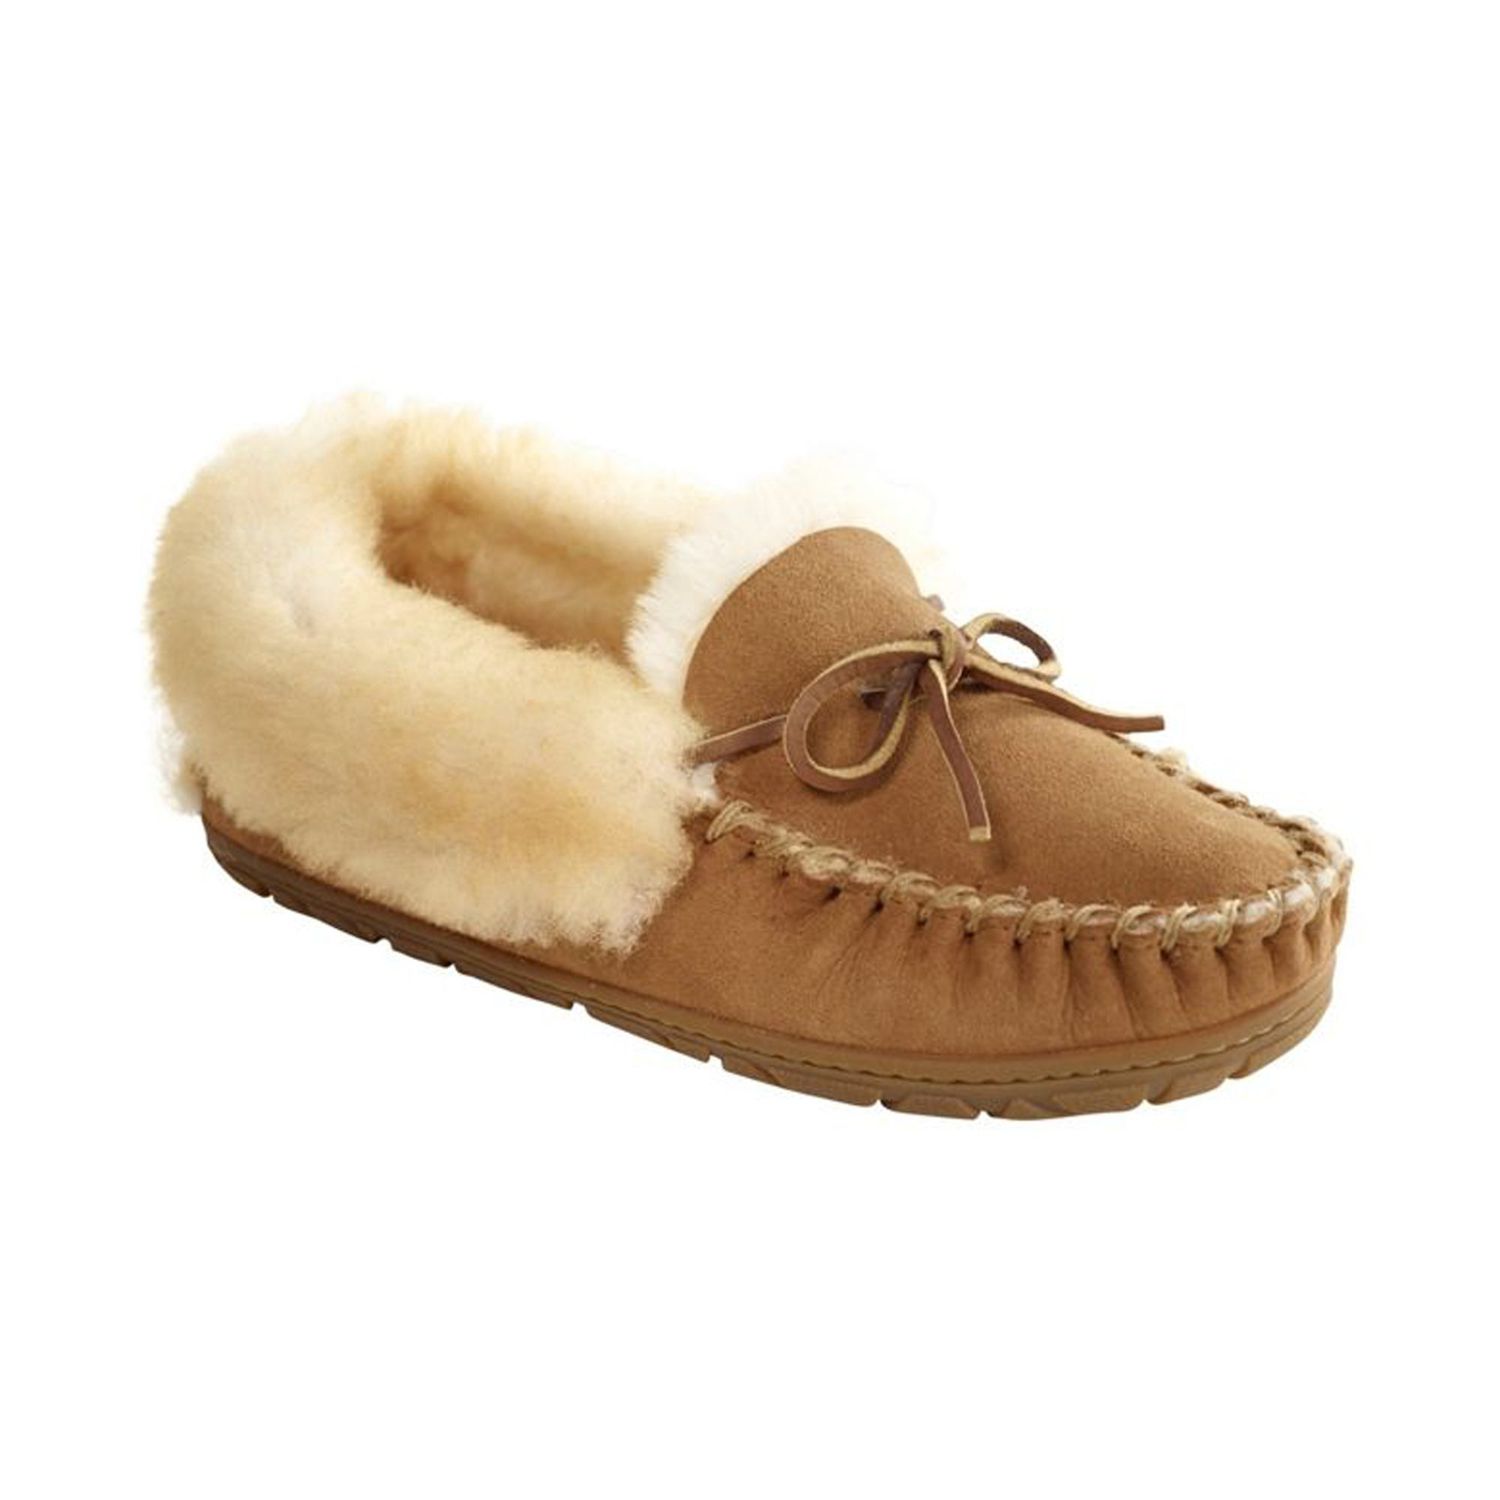 Product image of house slippers on a white background